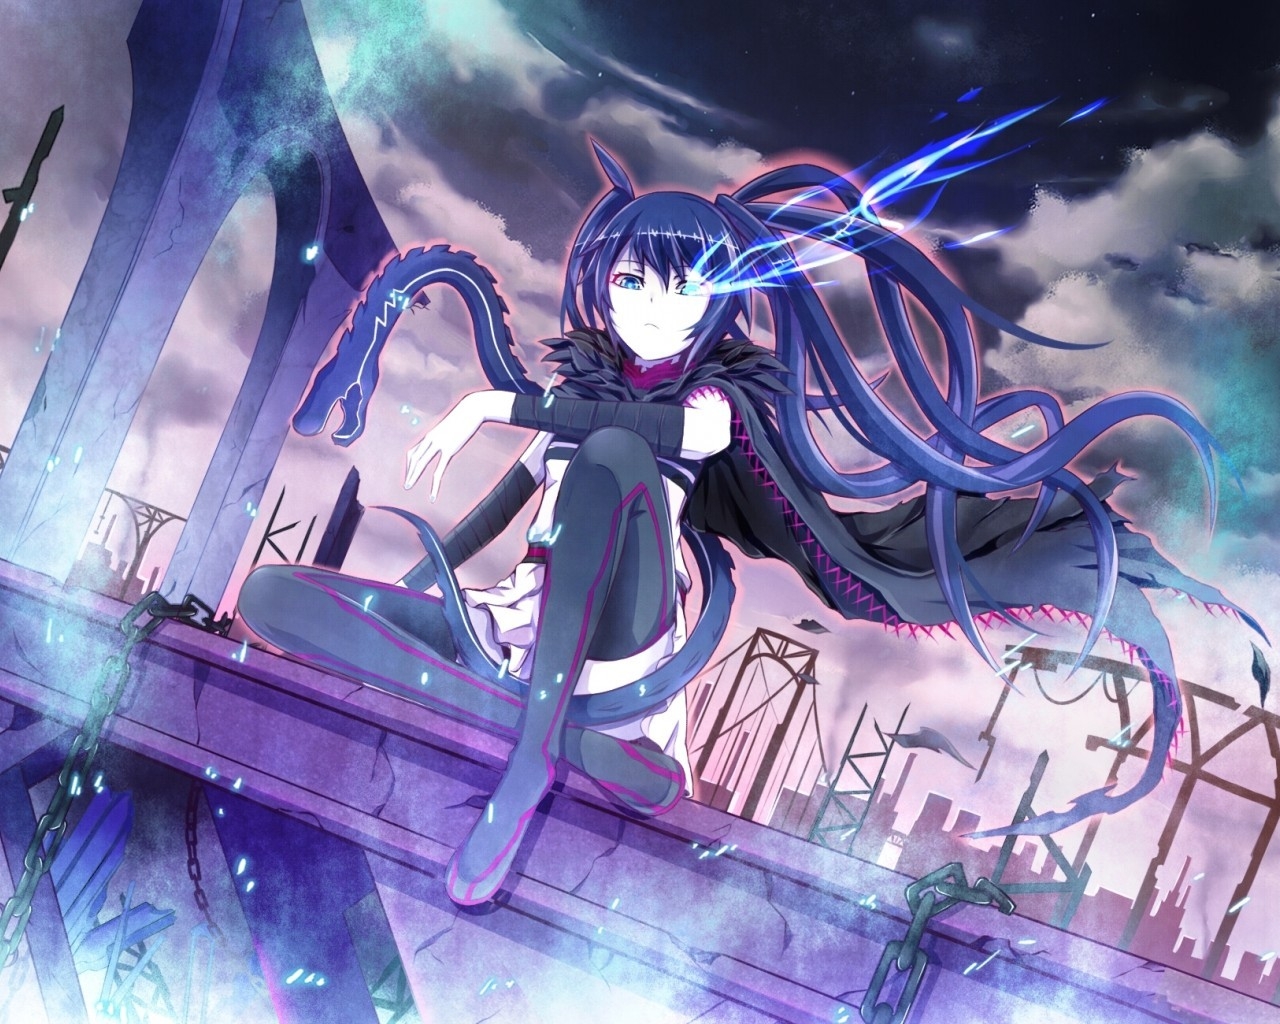 Black Rock Shooter Blue Eye Flame for 1280 x 1024 resolution